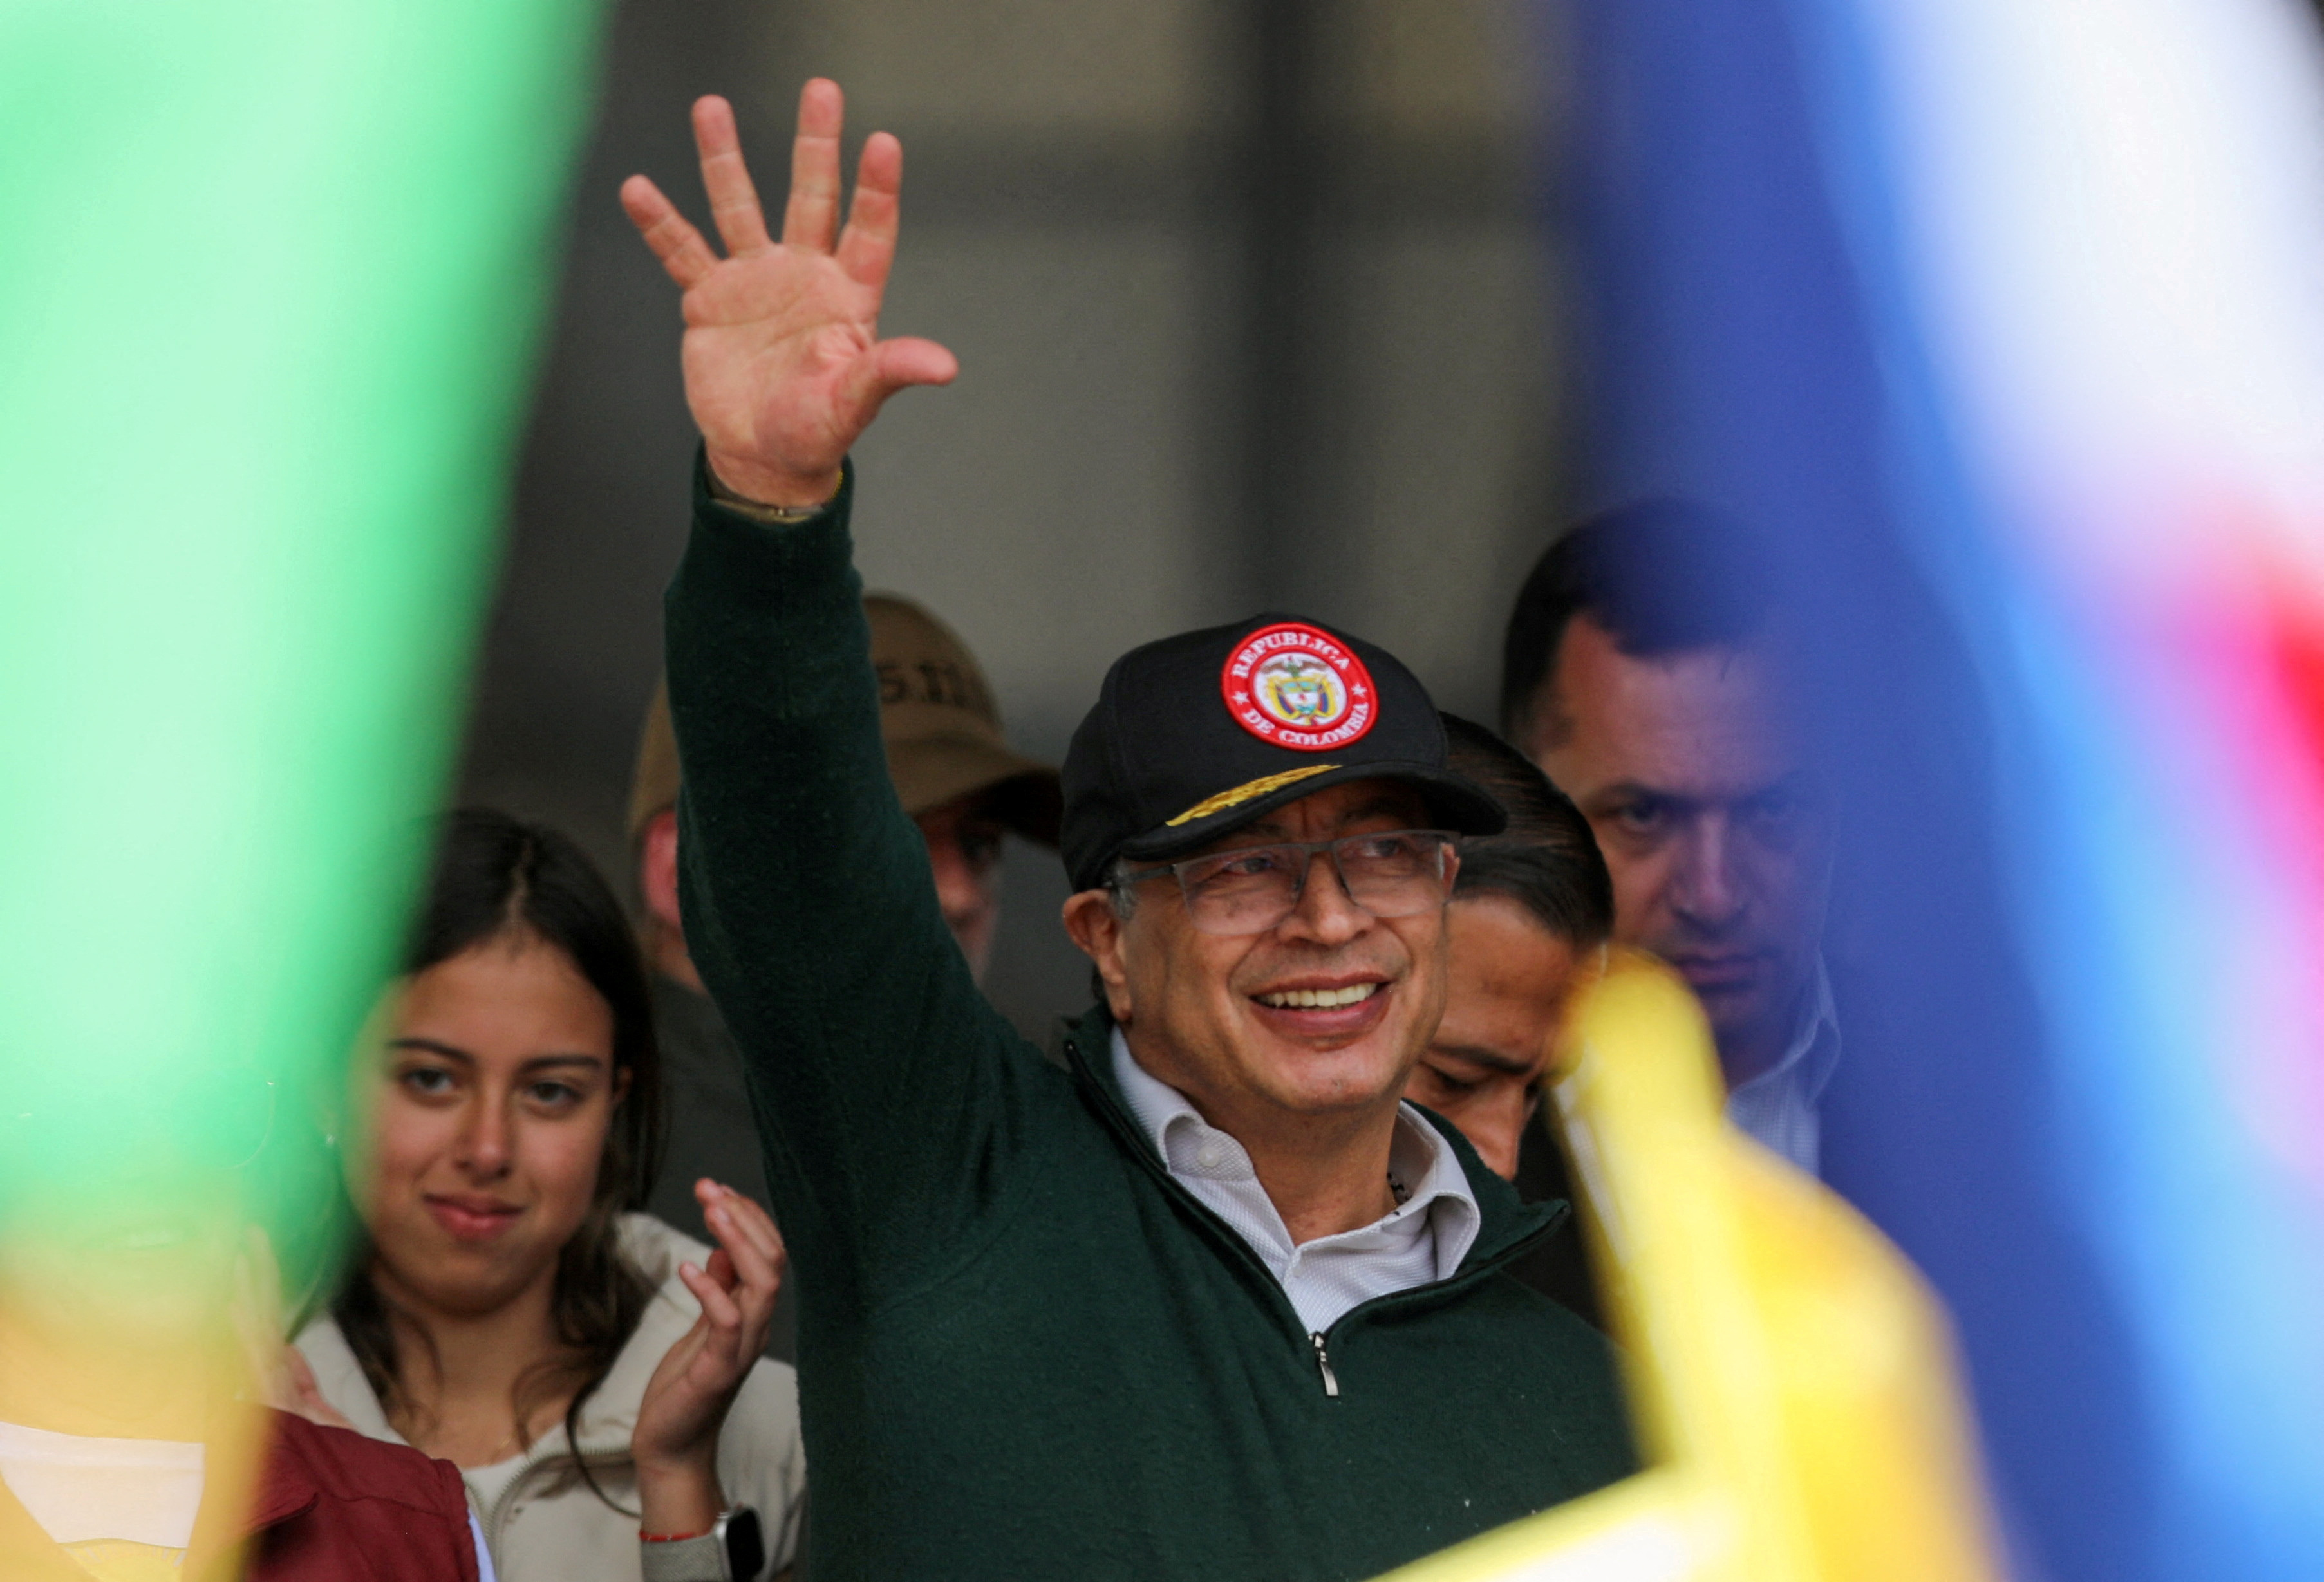 Colombia's president, Petro, is shown at an event in Bogota